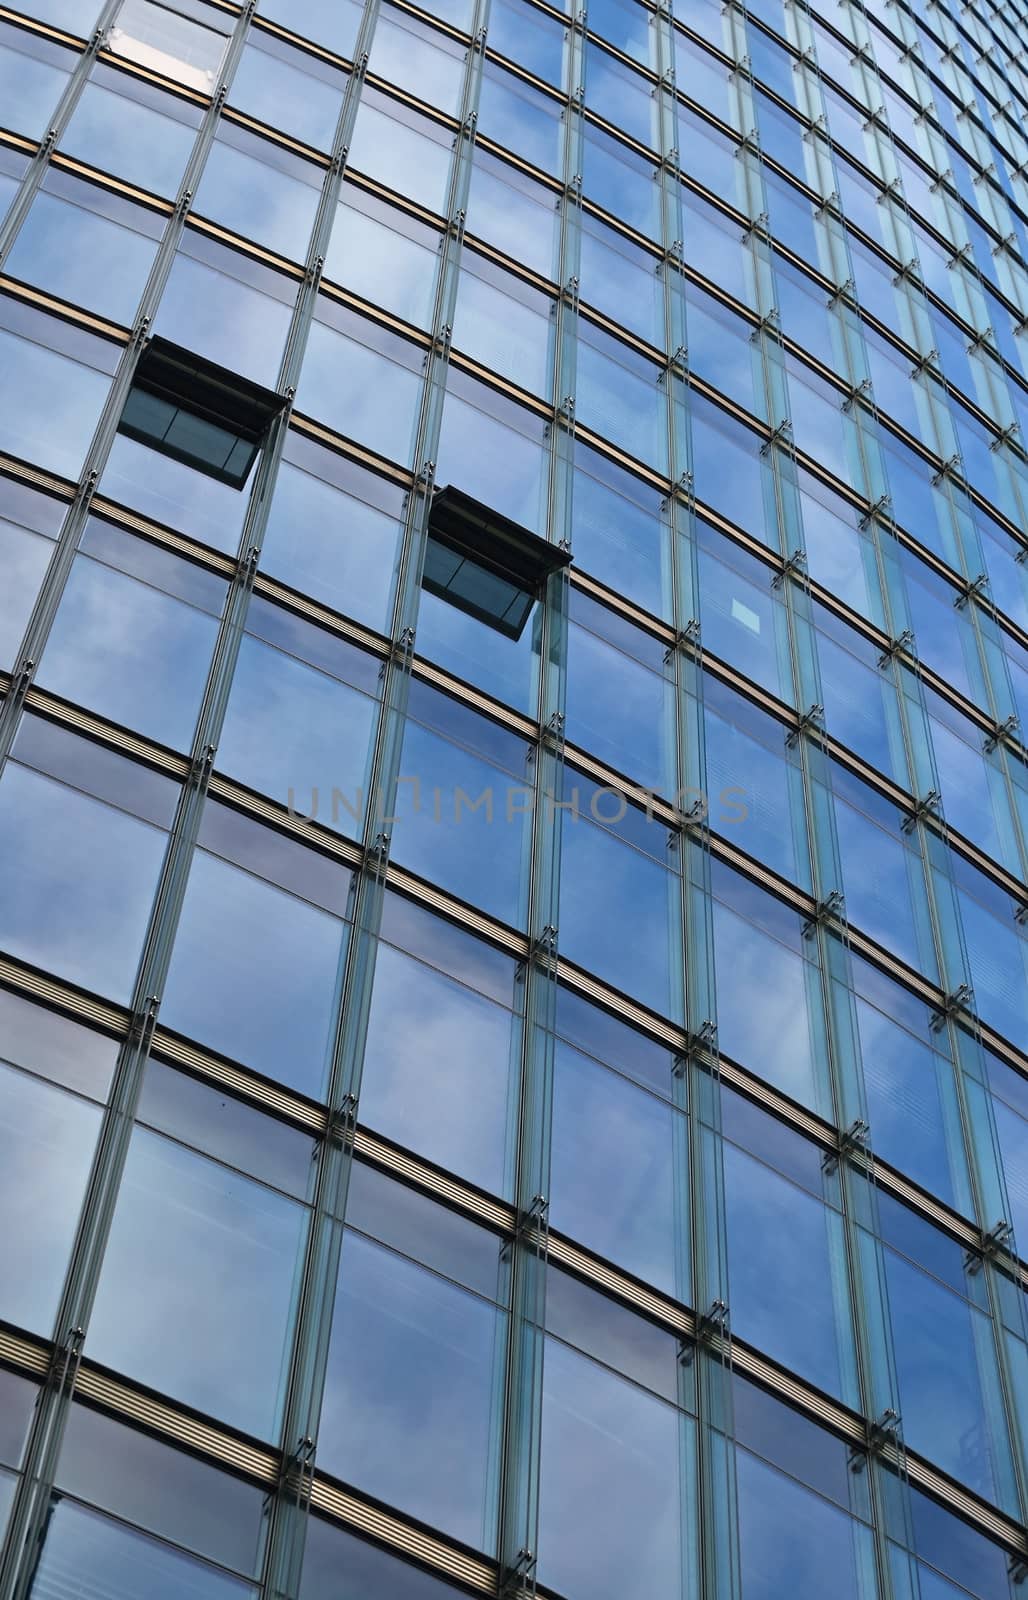 Background texture of business building windows by BreakingTheWalls